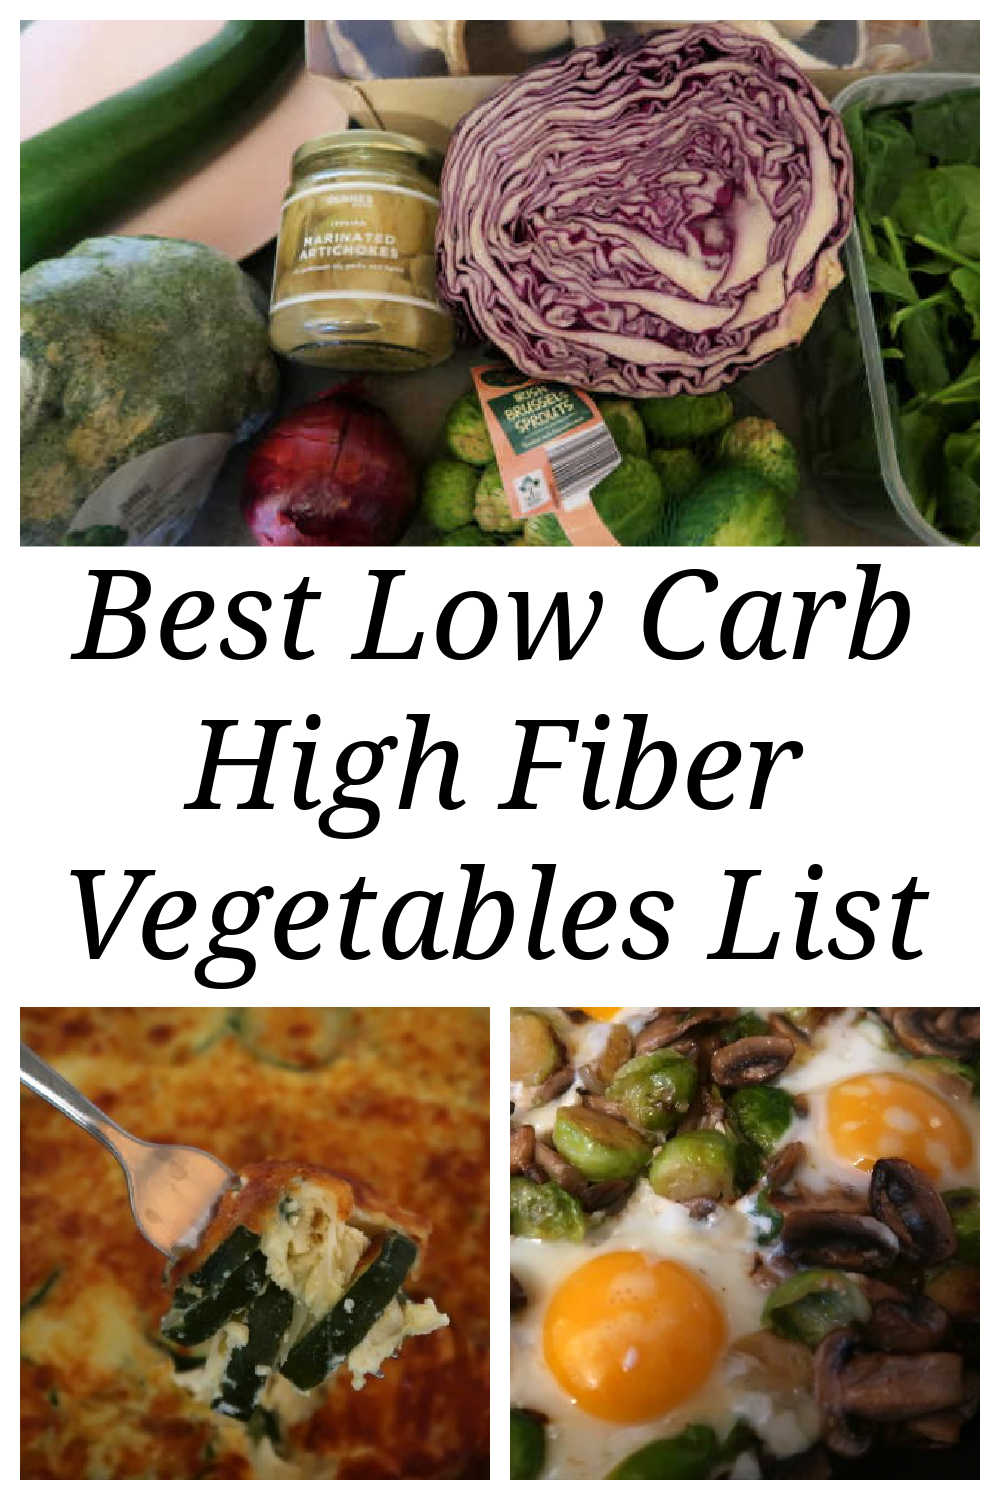 Low Carb High Fiber Vegetables List - the best keto diet friendly foods for you that are naturally low in carbs and high in healthy fibre.